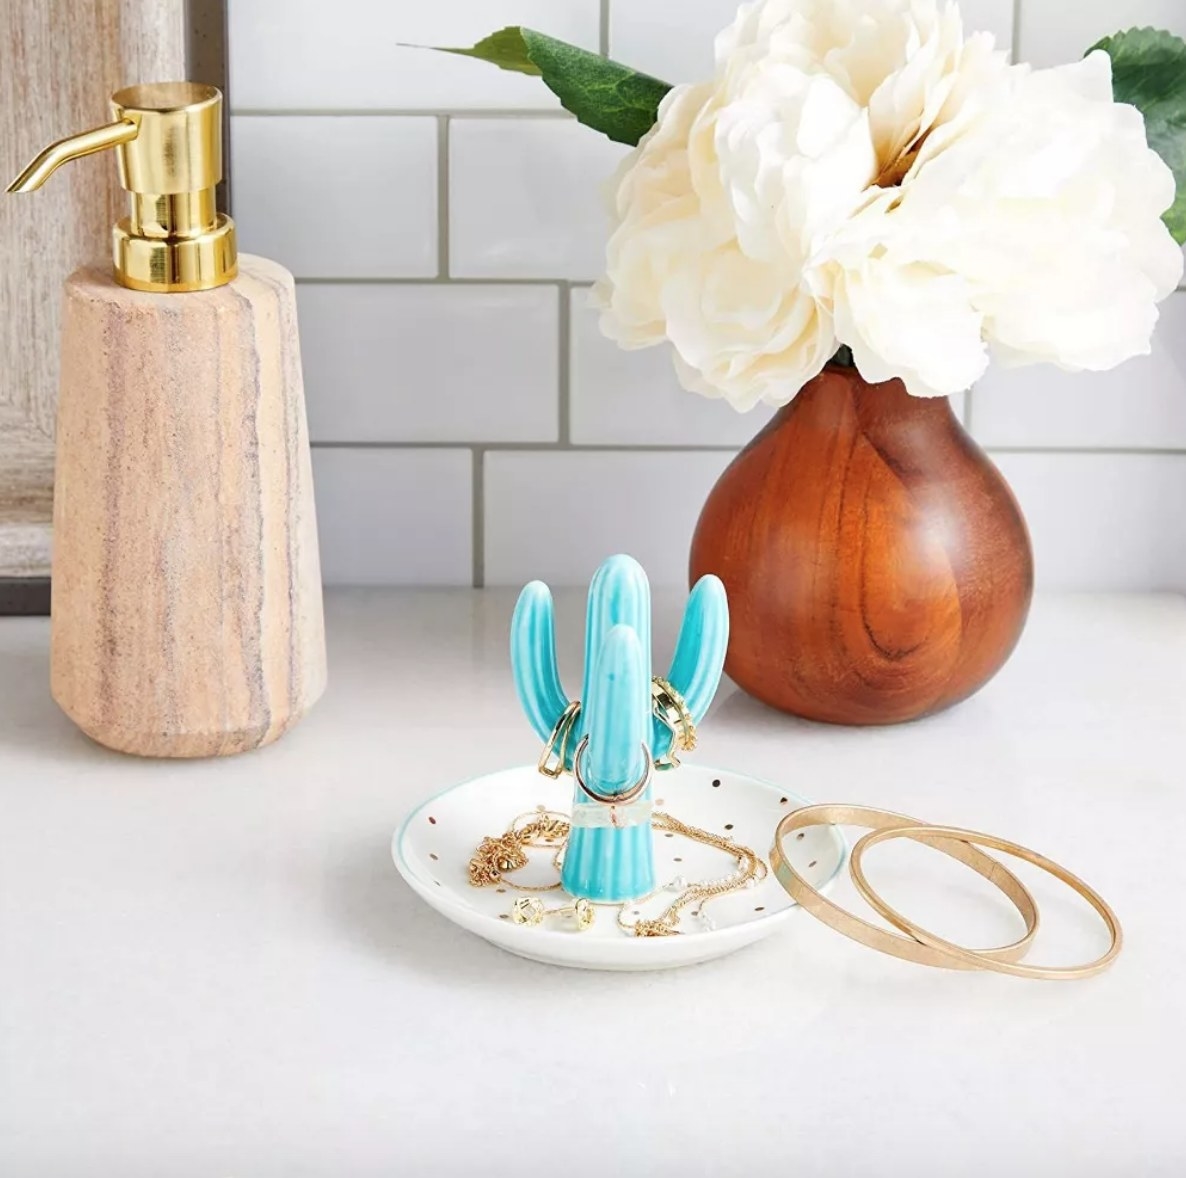 Blue cactus ring tray on counter in front of wooden soap dispenser and wooden vase